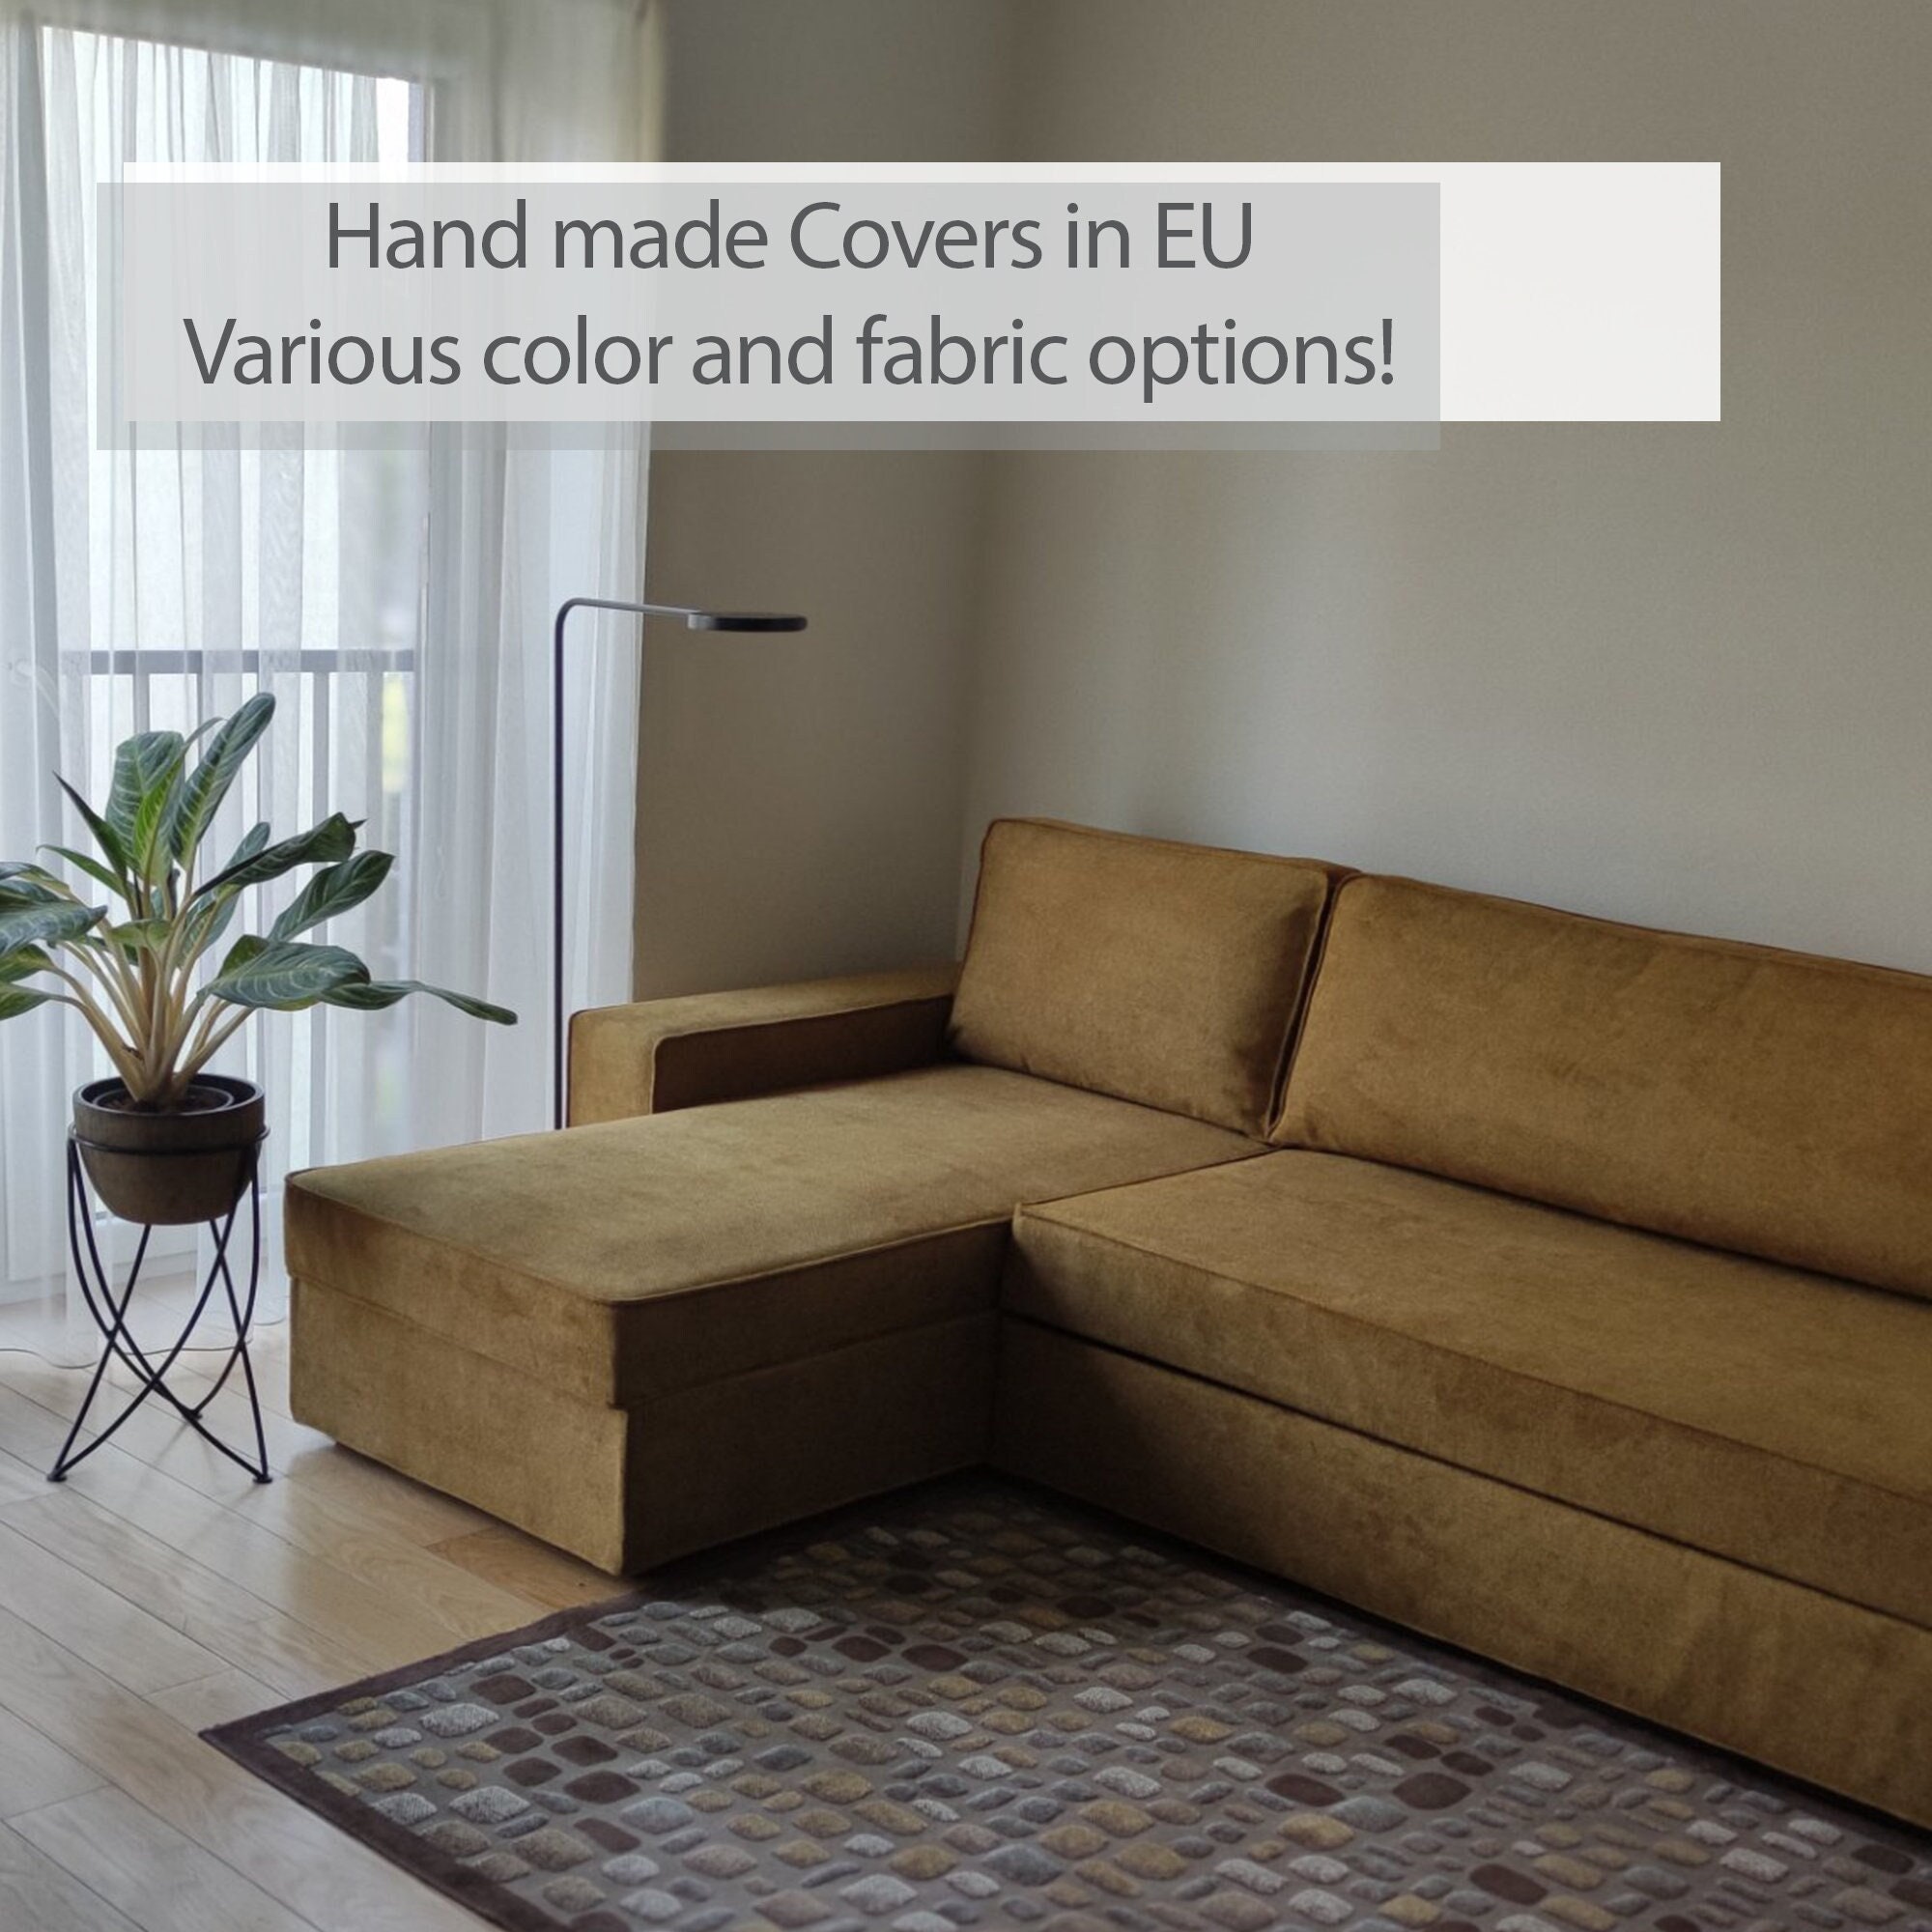 How to clean a sofa: tips to make your life easier - IKEA Spain